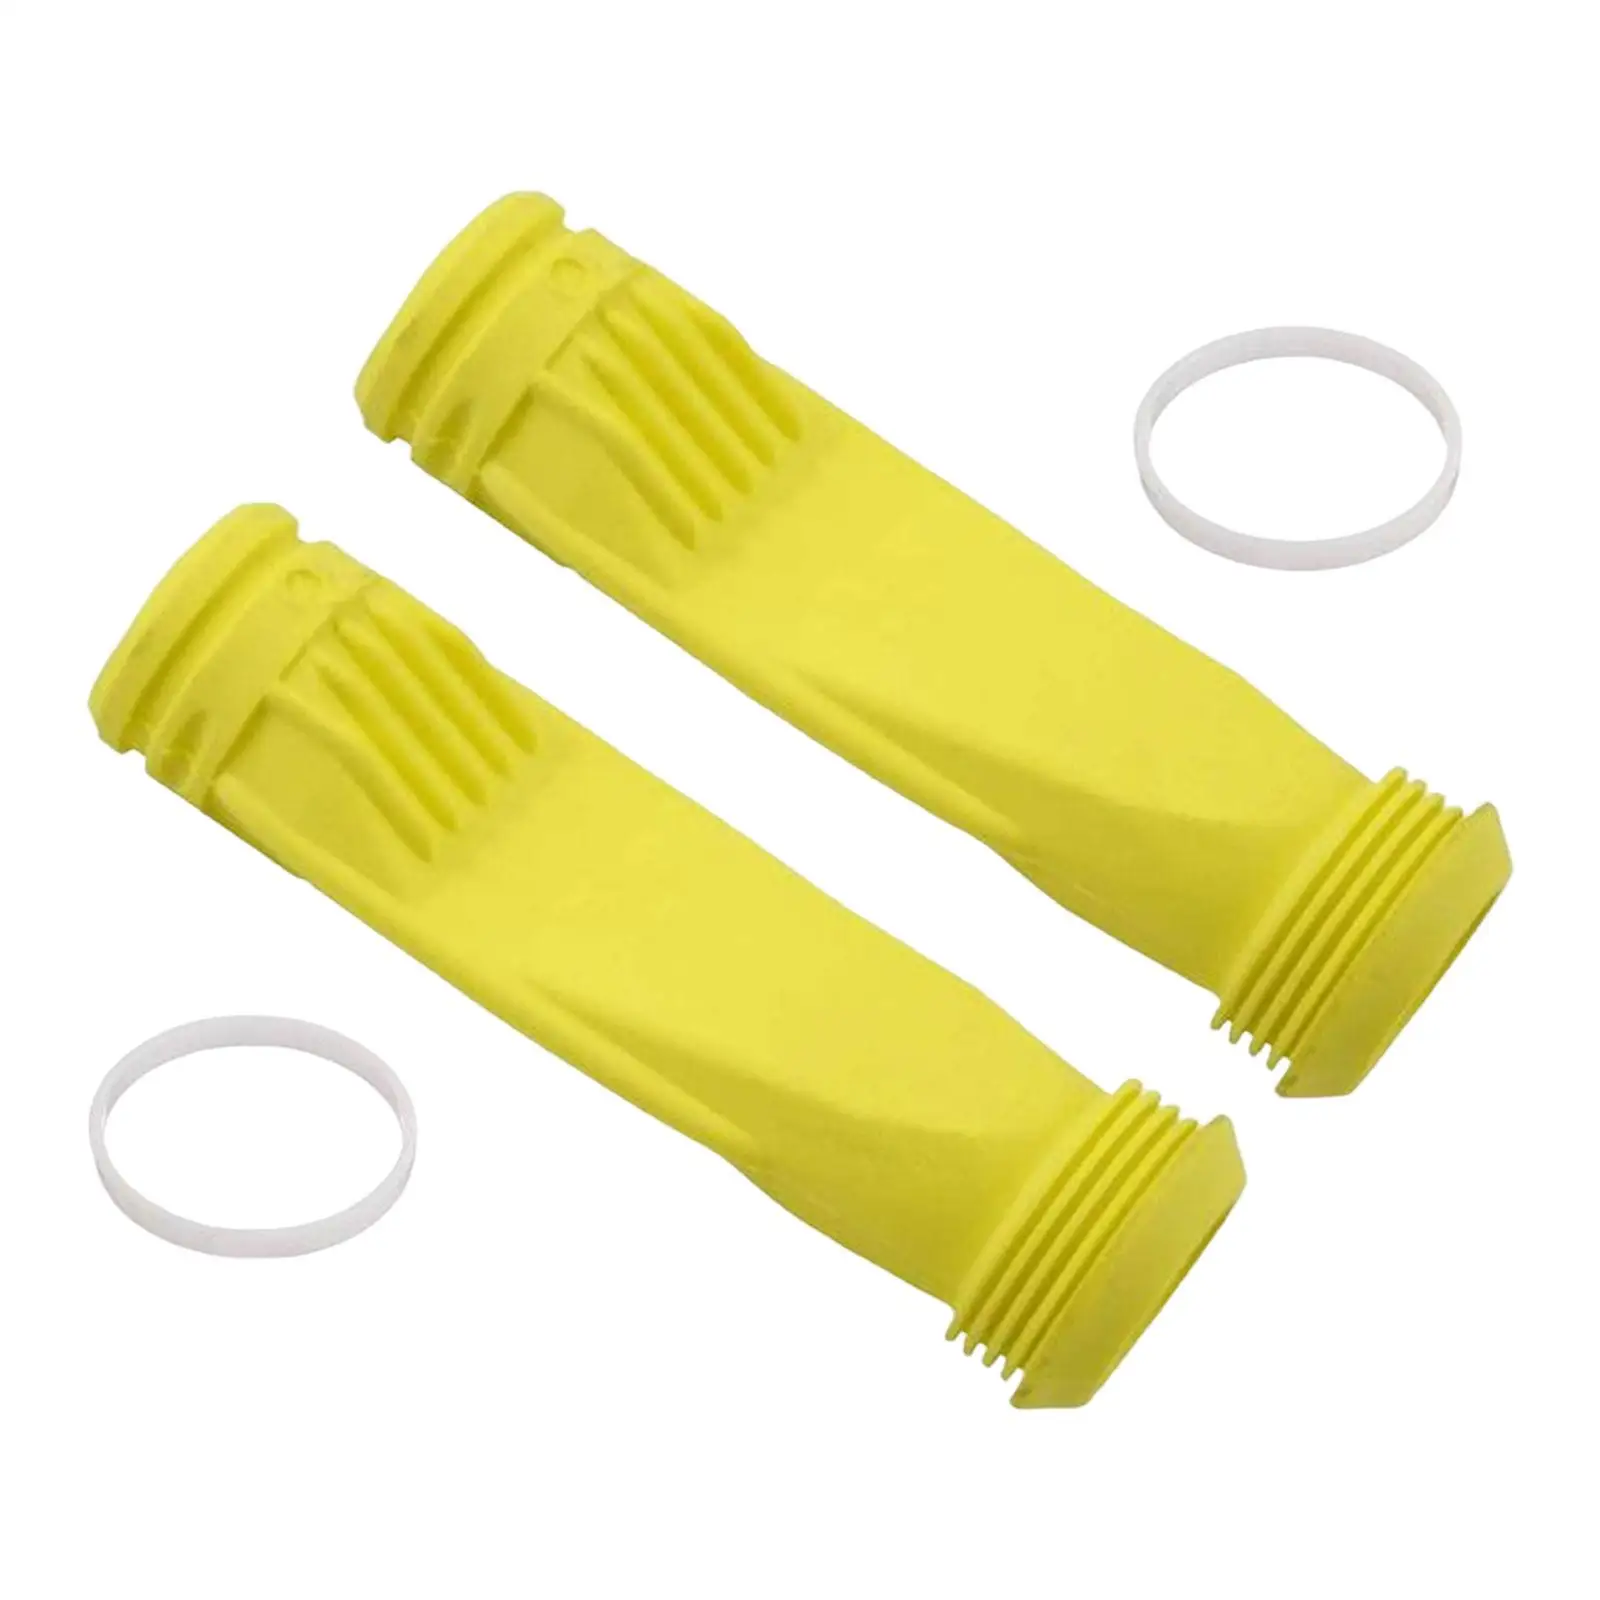 2 Pieces Pool Cleaner Durable Accessories Long Service Life Replacement Parts Easily Install Flexible Premium Portable Rubber